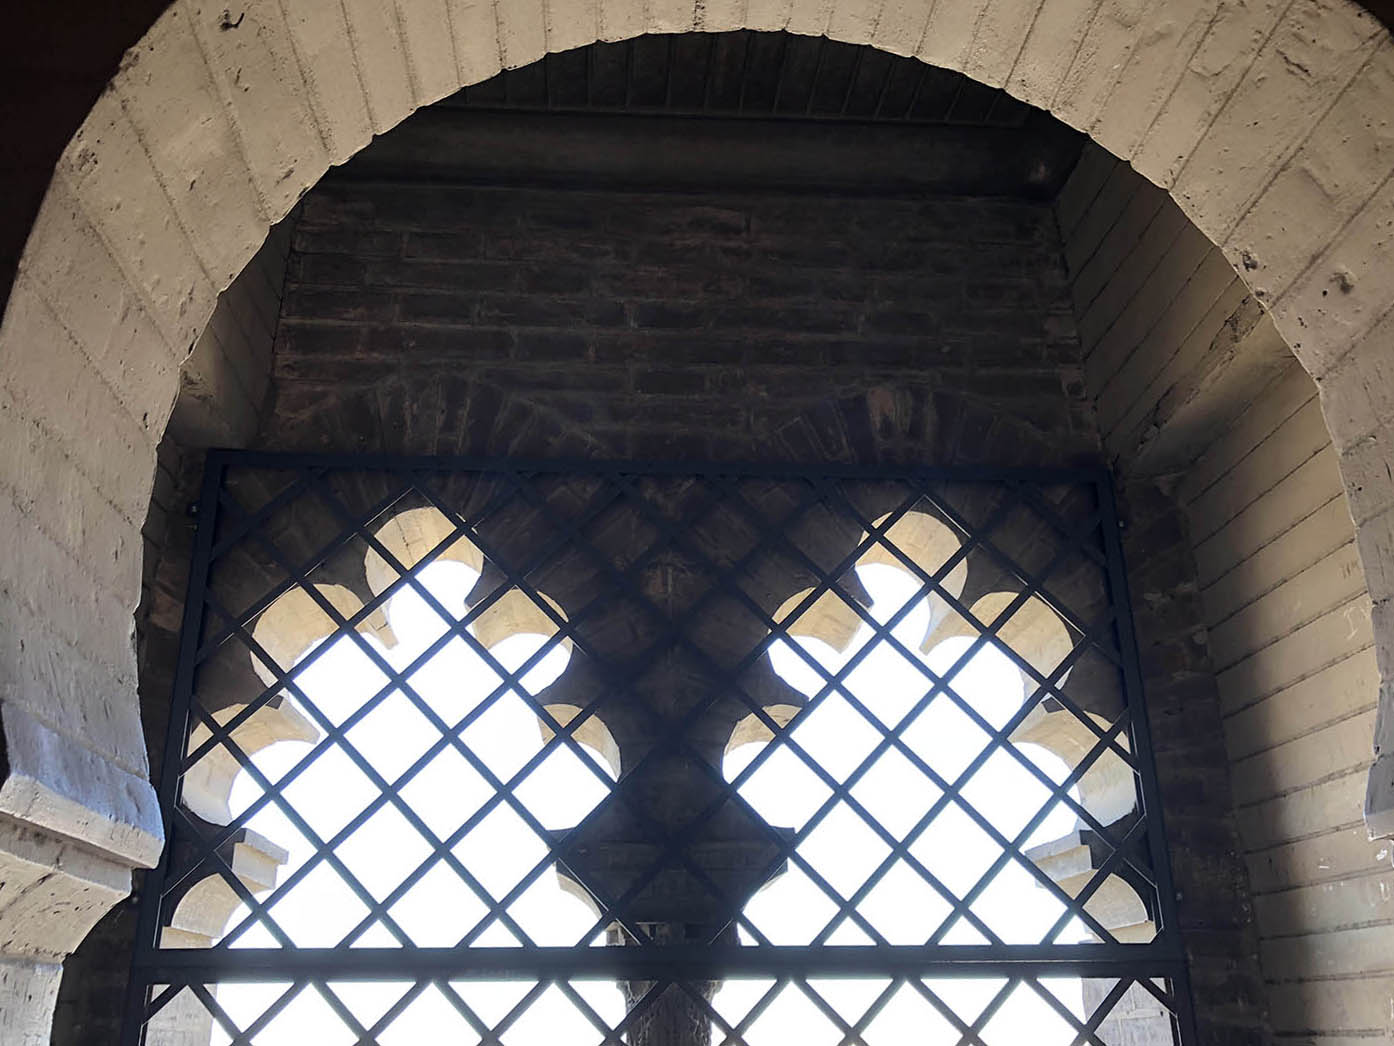 Detail view of cinque foil window arches through the top of a horseshoe arch in La Giralda.